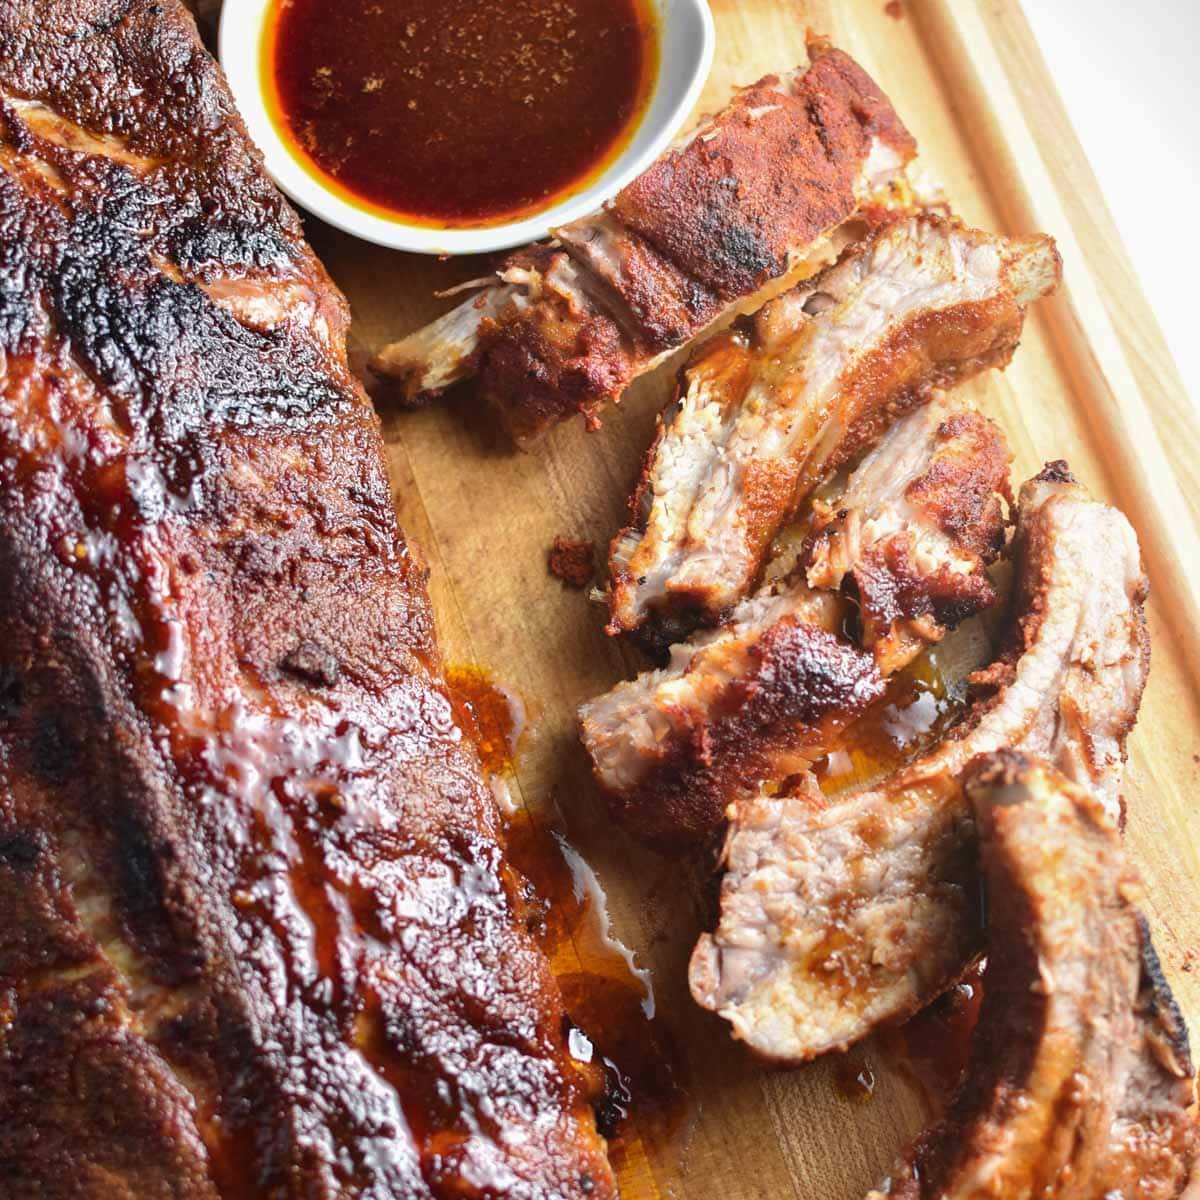 https://thedizzycook.com/wp-content/uploads/2021/05/dry-rub-baby-back-ribs-oven.jpg